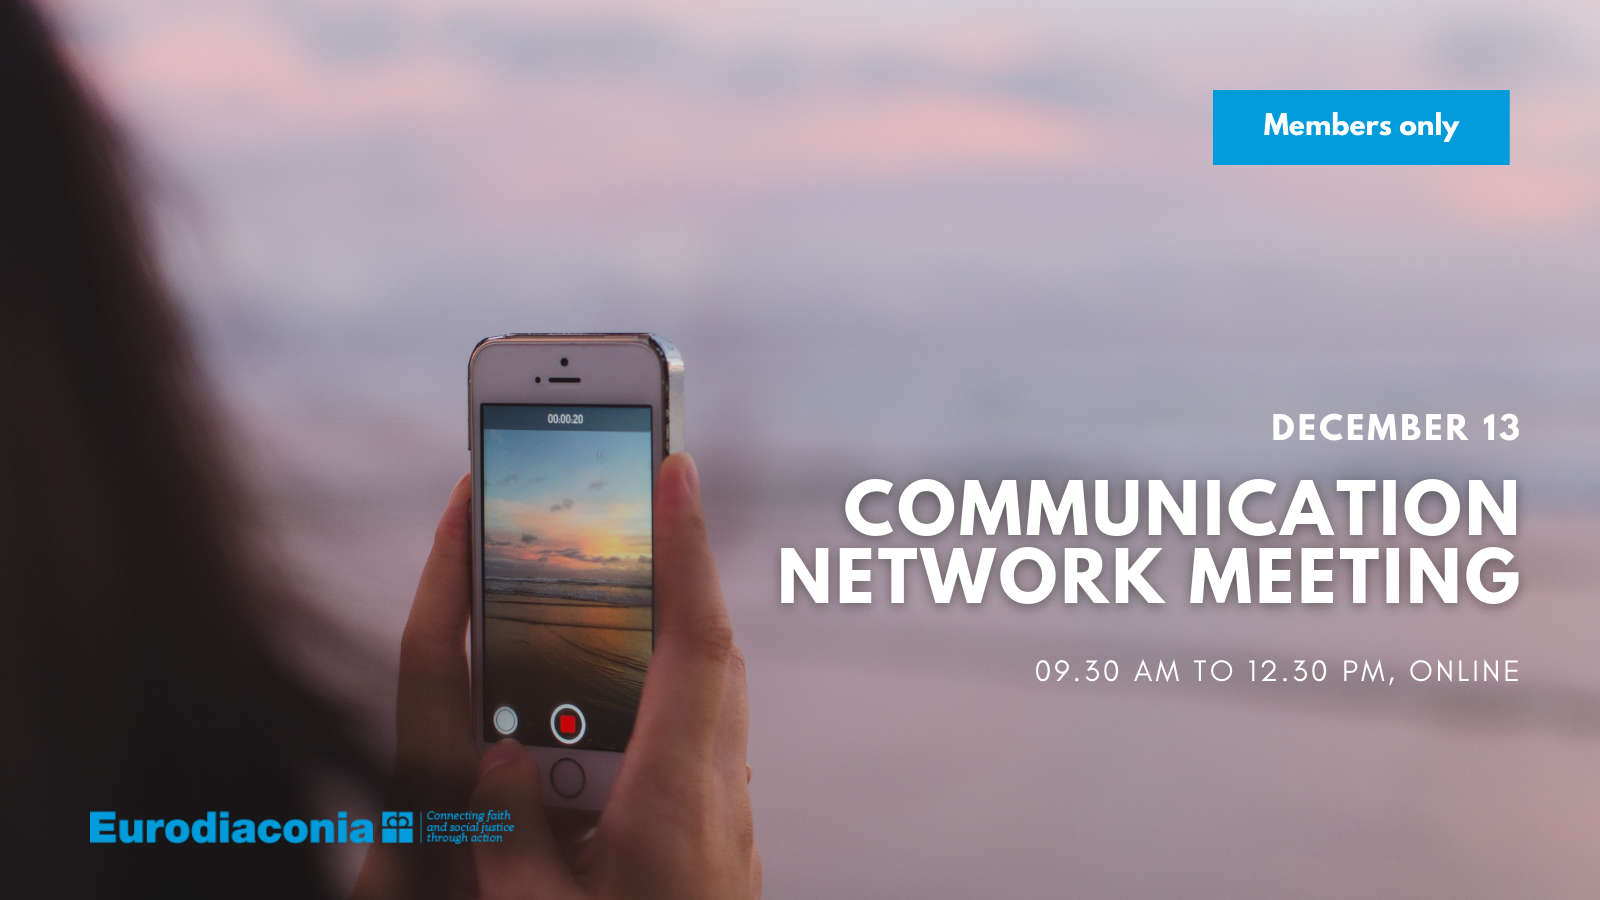 Communications Network Meeting and Training | Online Workshop for Members Only